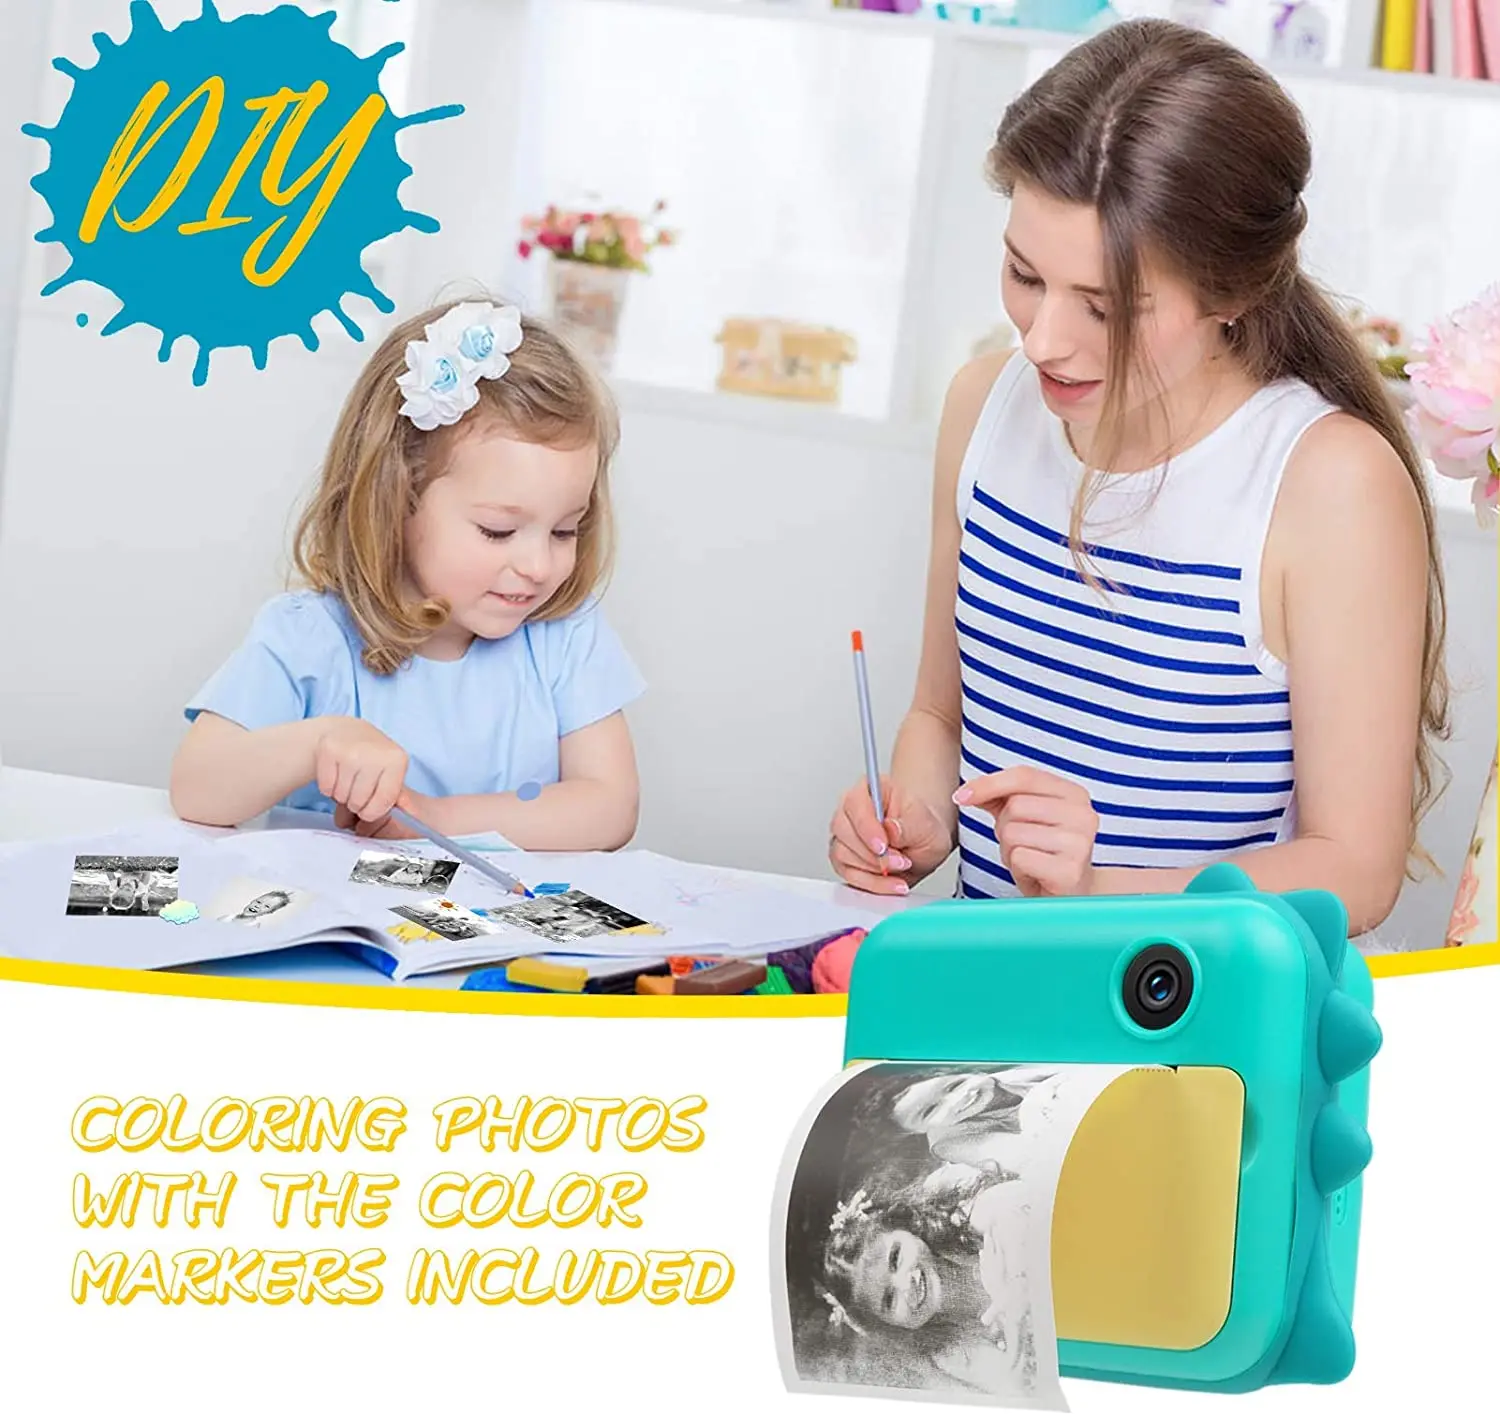 Instant Print Camera for Kids Cameras Support WiFi Connect Portable Digital Camera